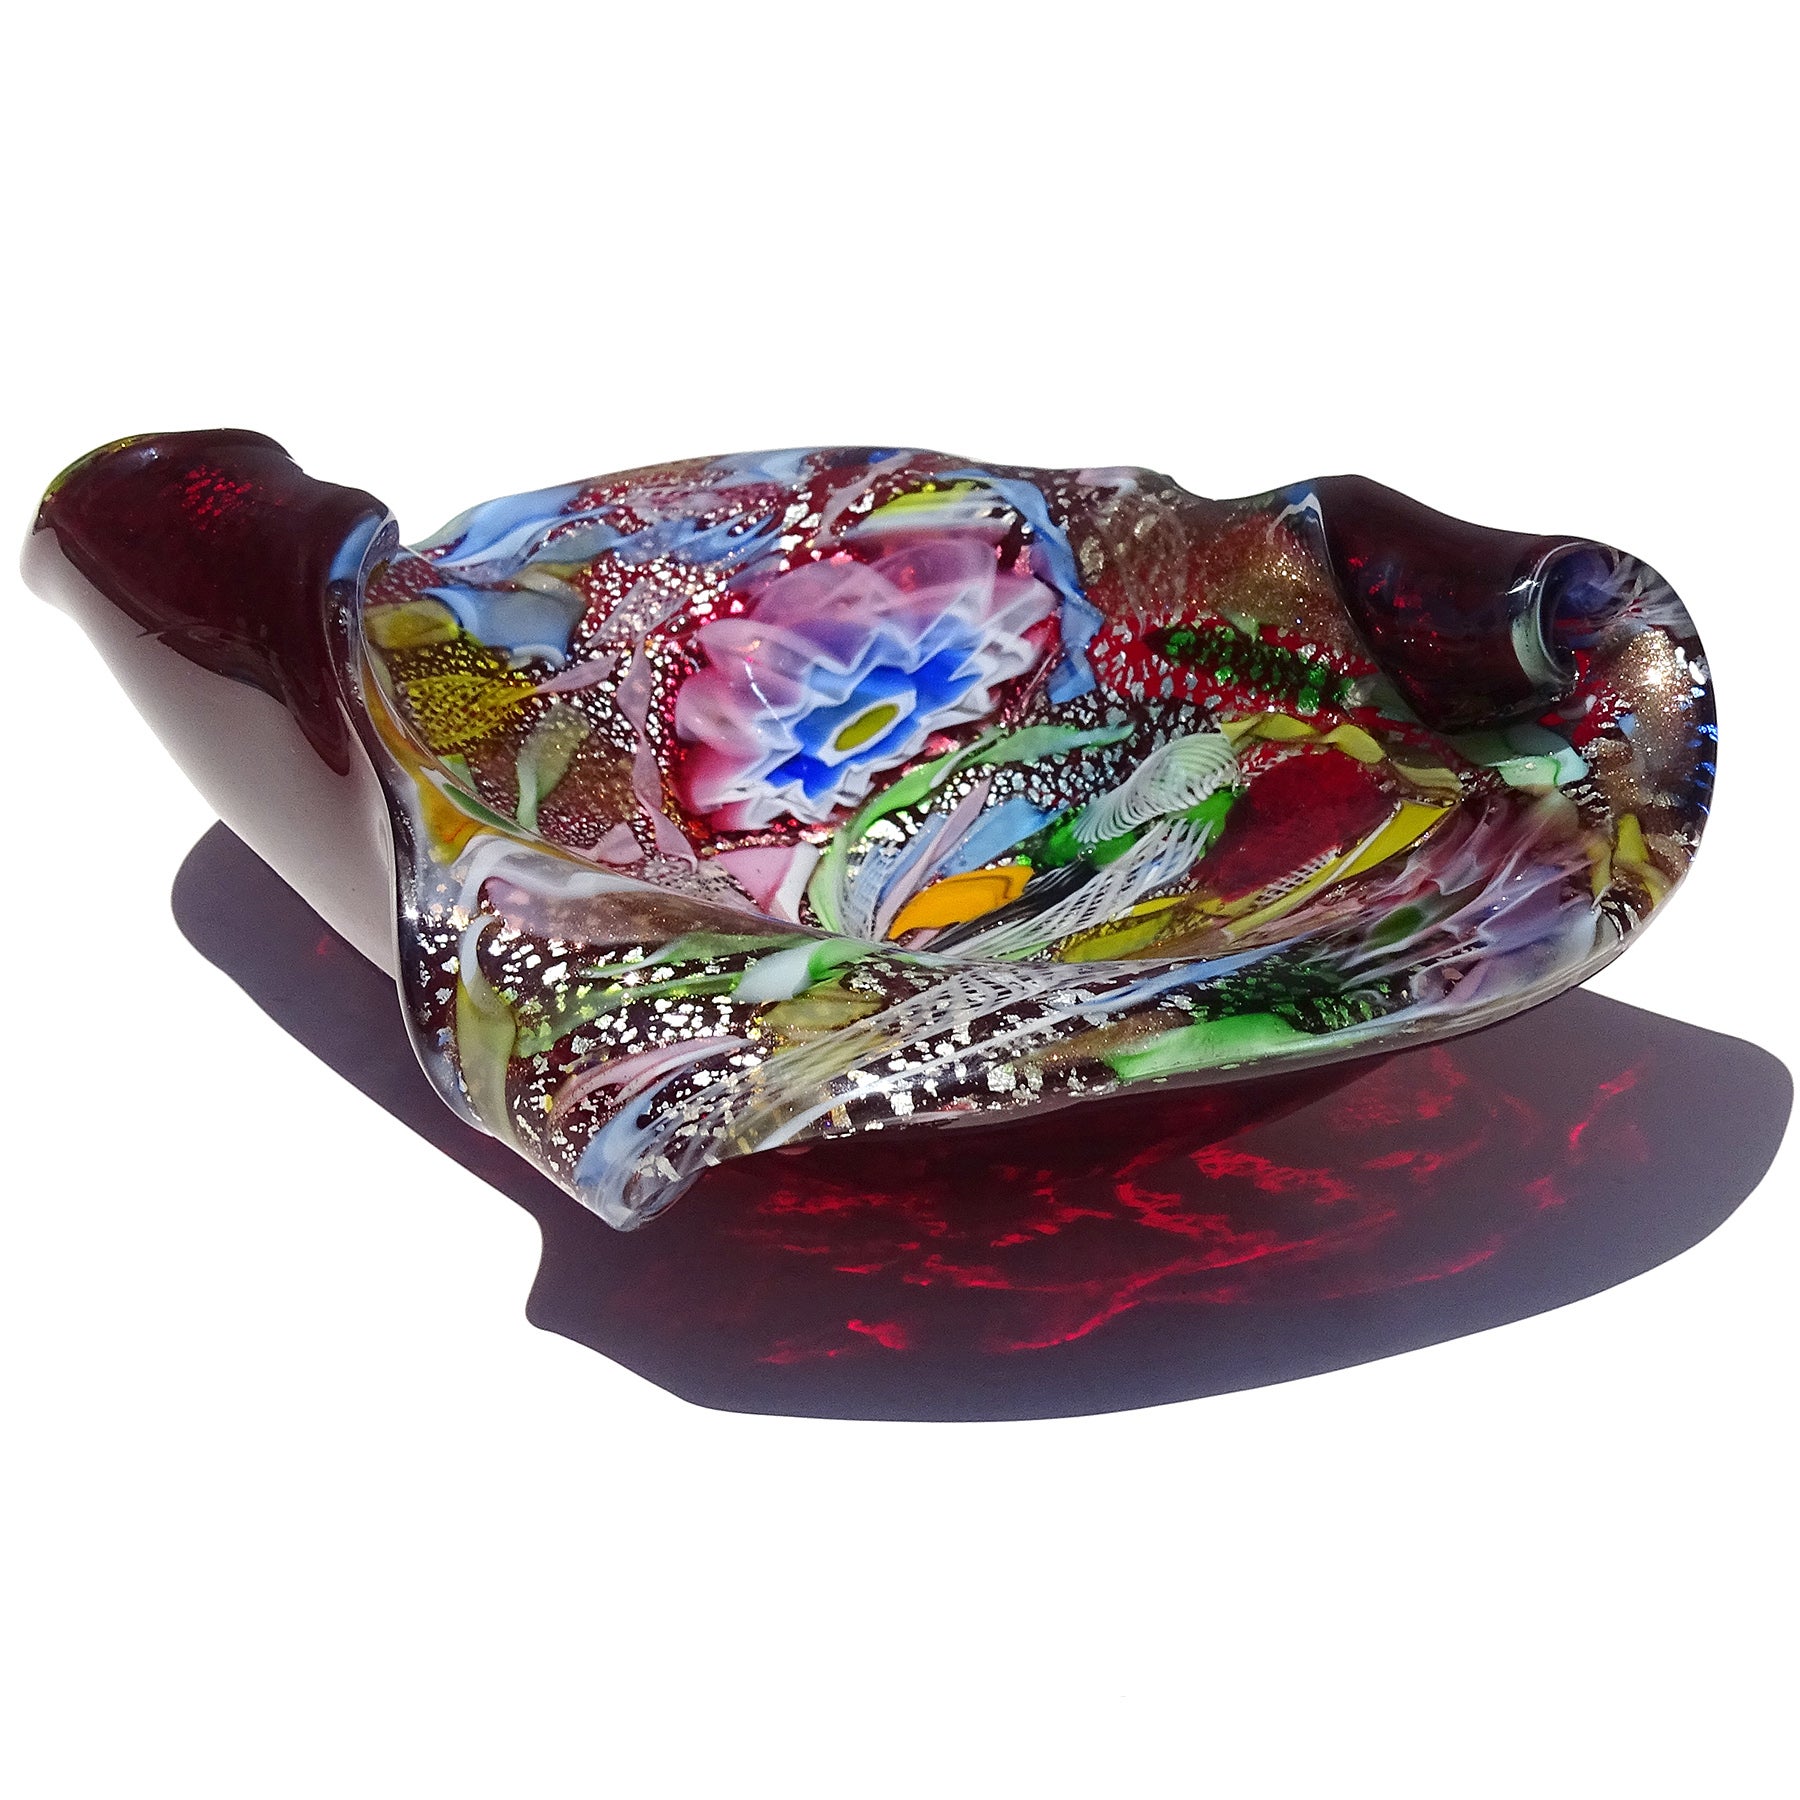 Beautiful and large, vintage Murano hand blown red, silver, copper aventurine, millefiori flower murrines and twisted ribbons Italian art glass center bowl. It is documented to the A.Ve.M. (Arte Vetraria Muranese) company. The bowl has a scissor cut